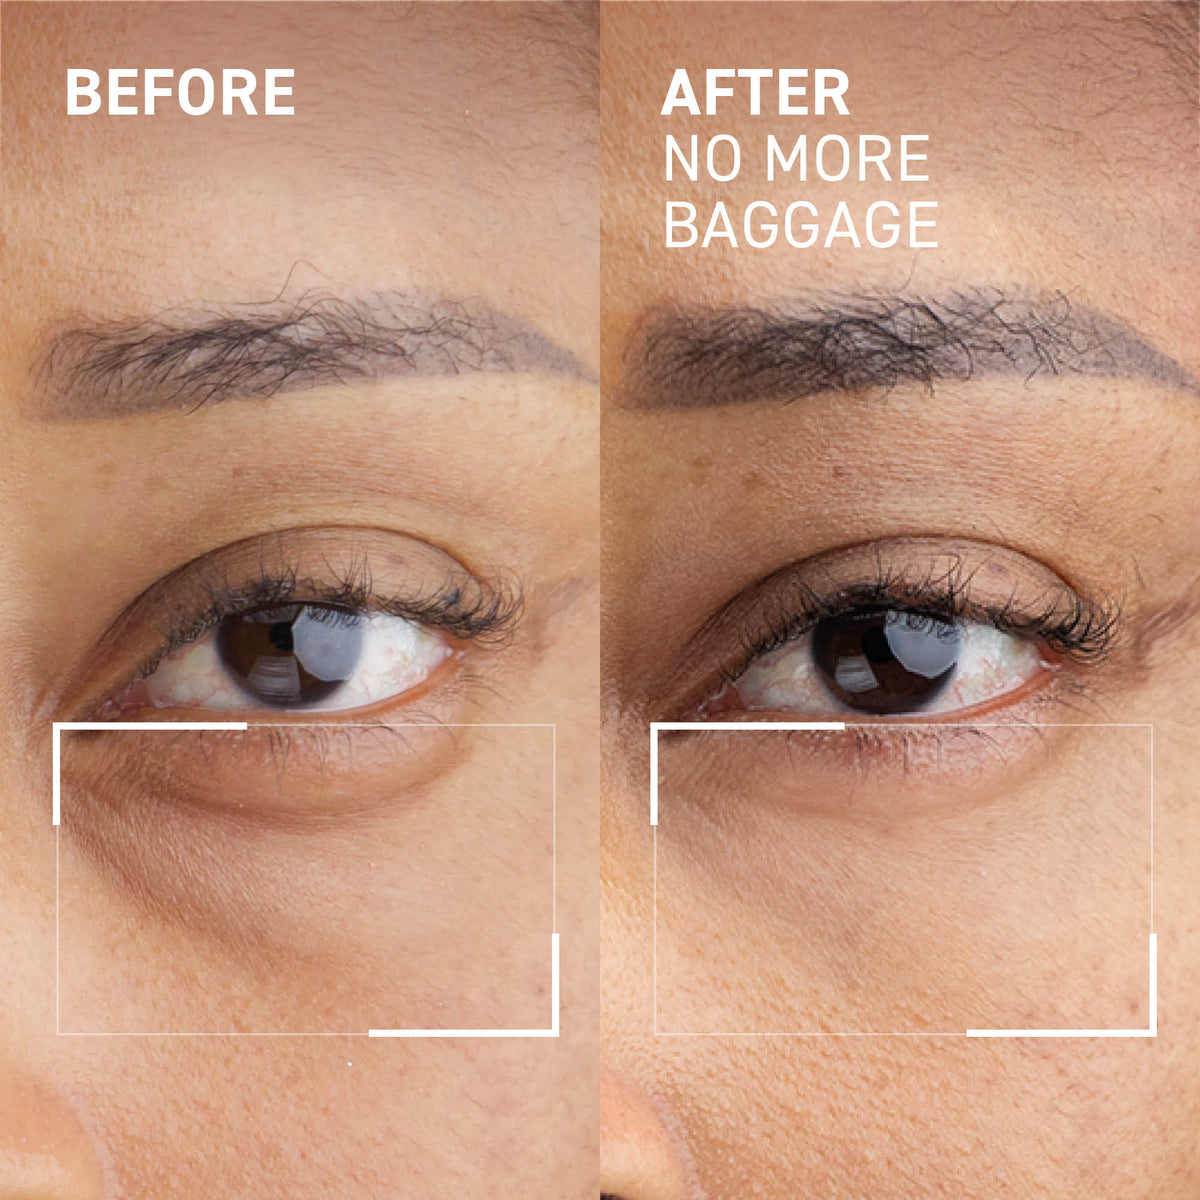 Reviewers 'Can't Believe' How Quickly This Eye Gel Tones Down Bags